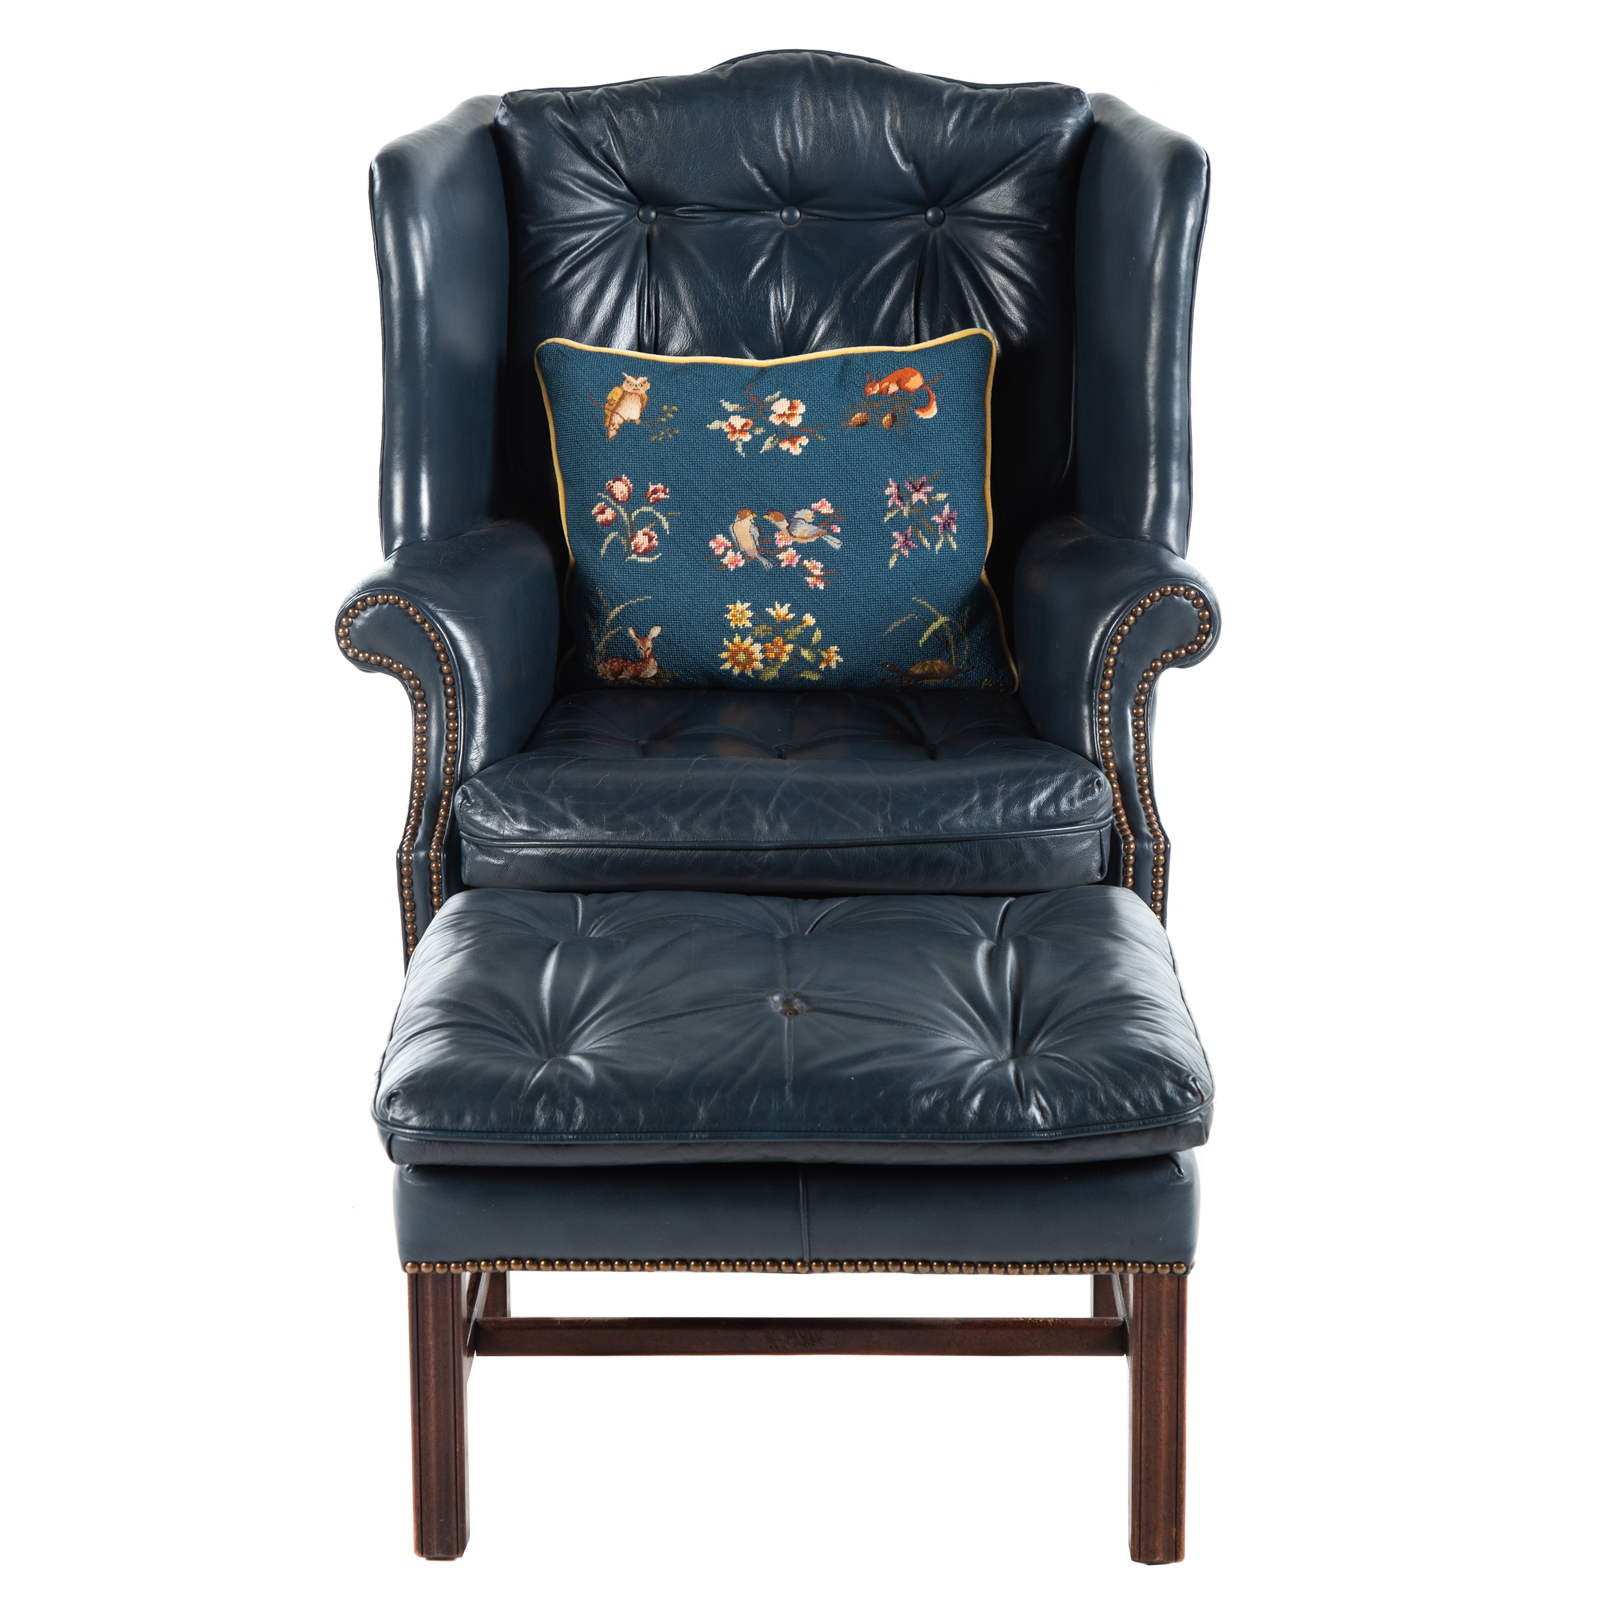 CLASSIC LEATHER TUFTED CHAIR  2eae96